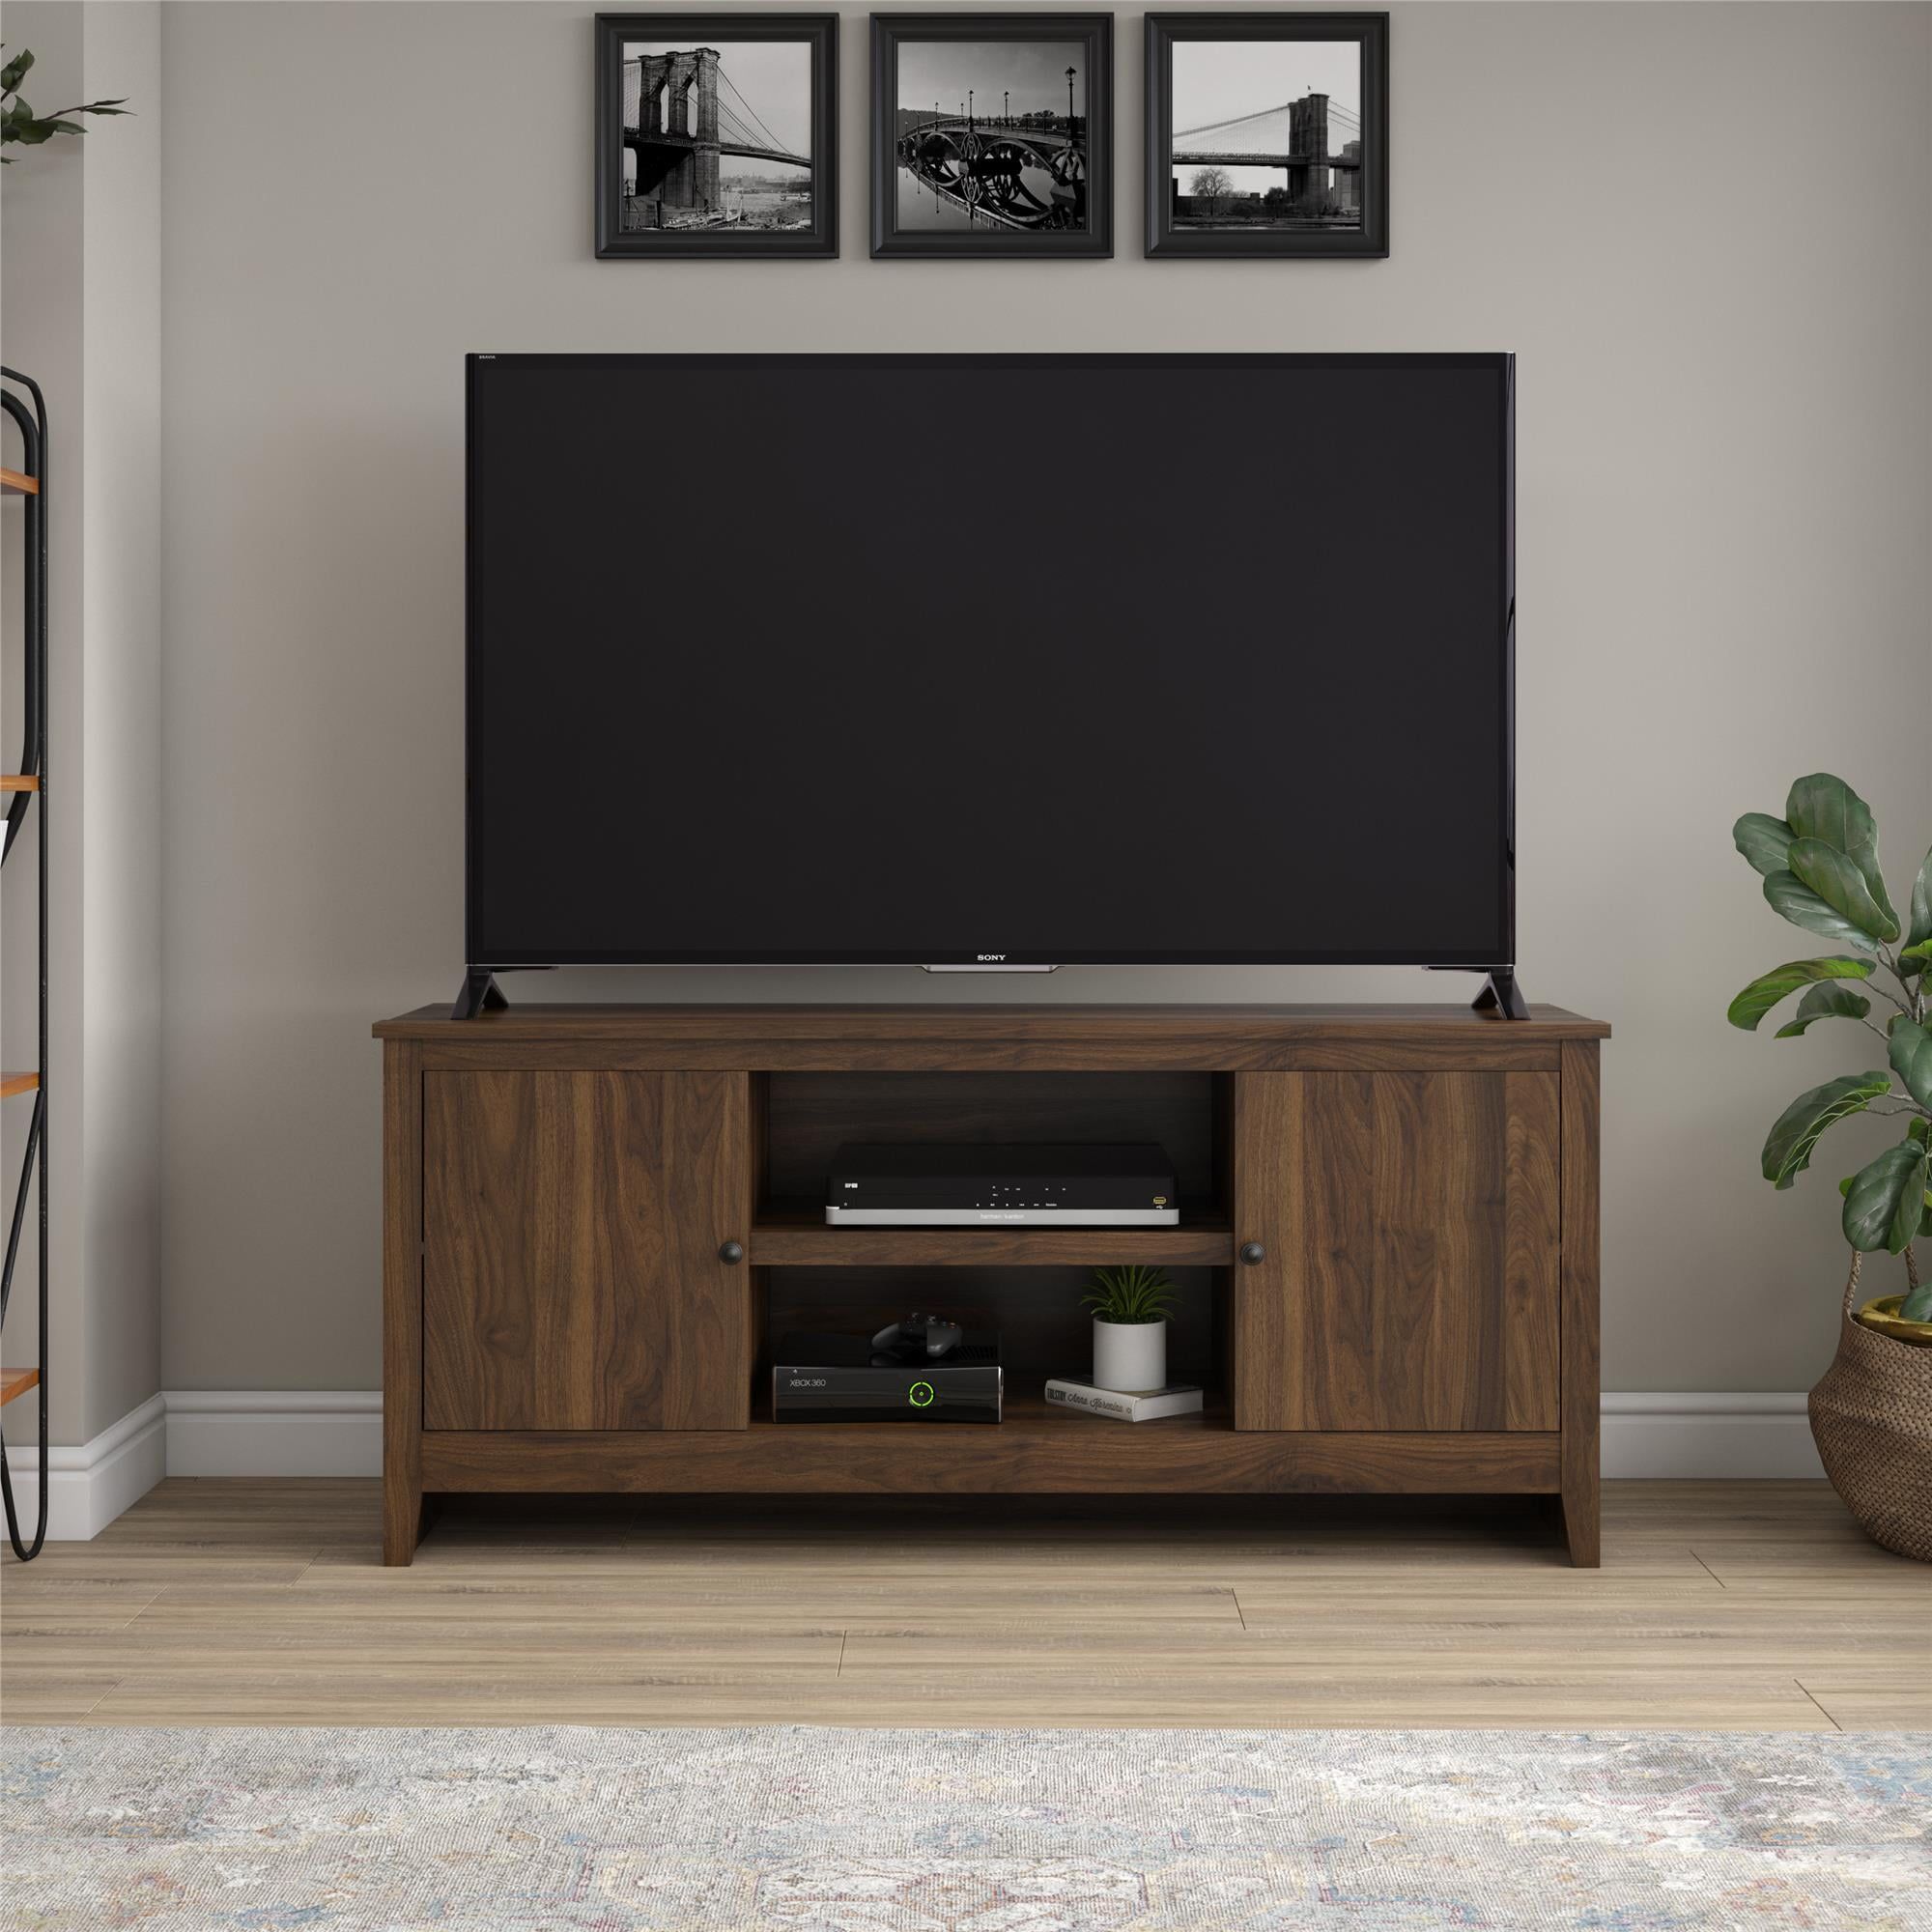 Mainstays Tv Stand For Tvs Up To 65", Walnut – Walmart Regarding Dual Use Storage Cabinet Tv Stands (Gallery 14 of 20)